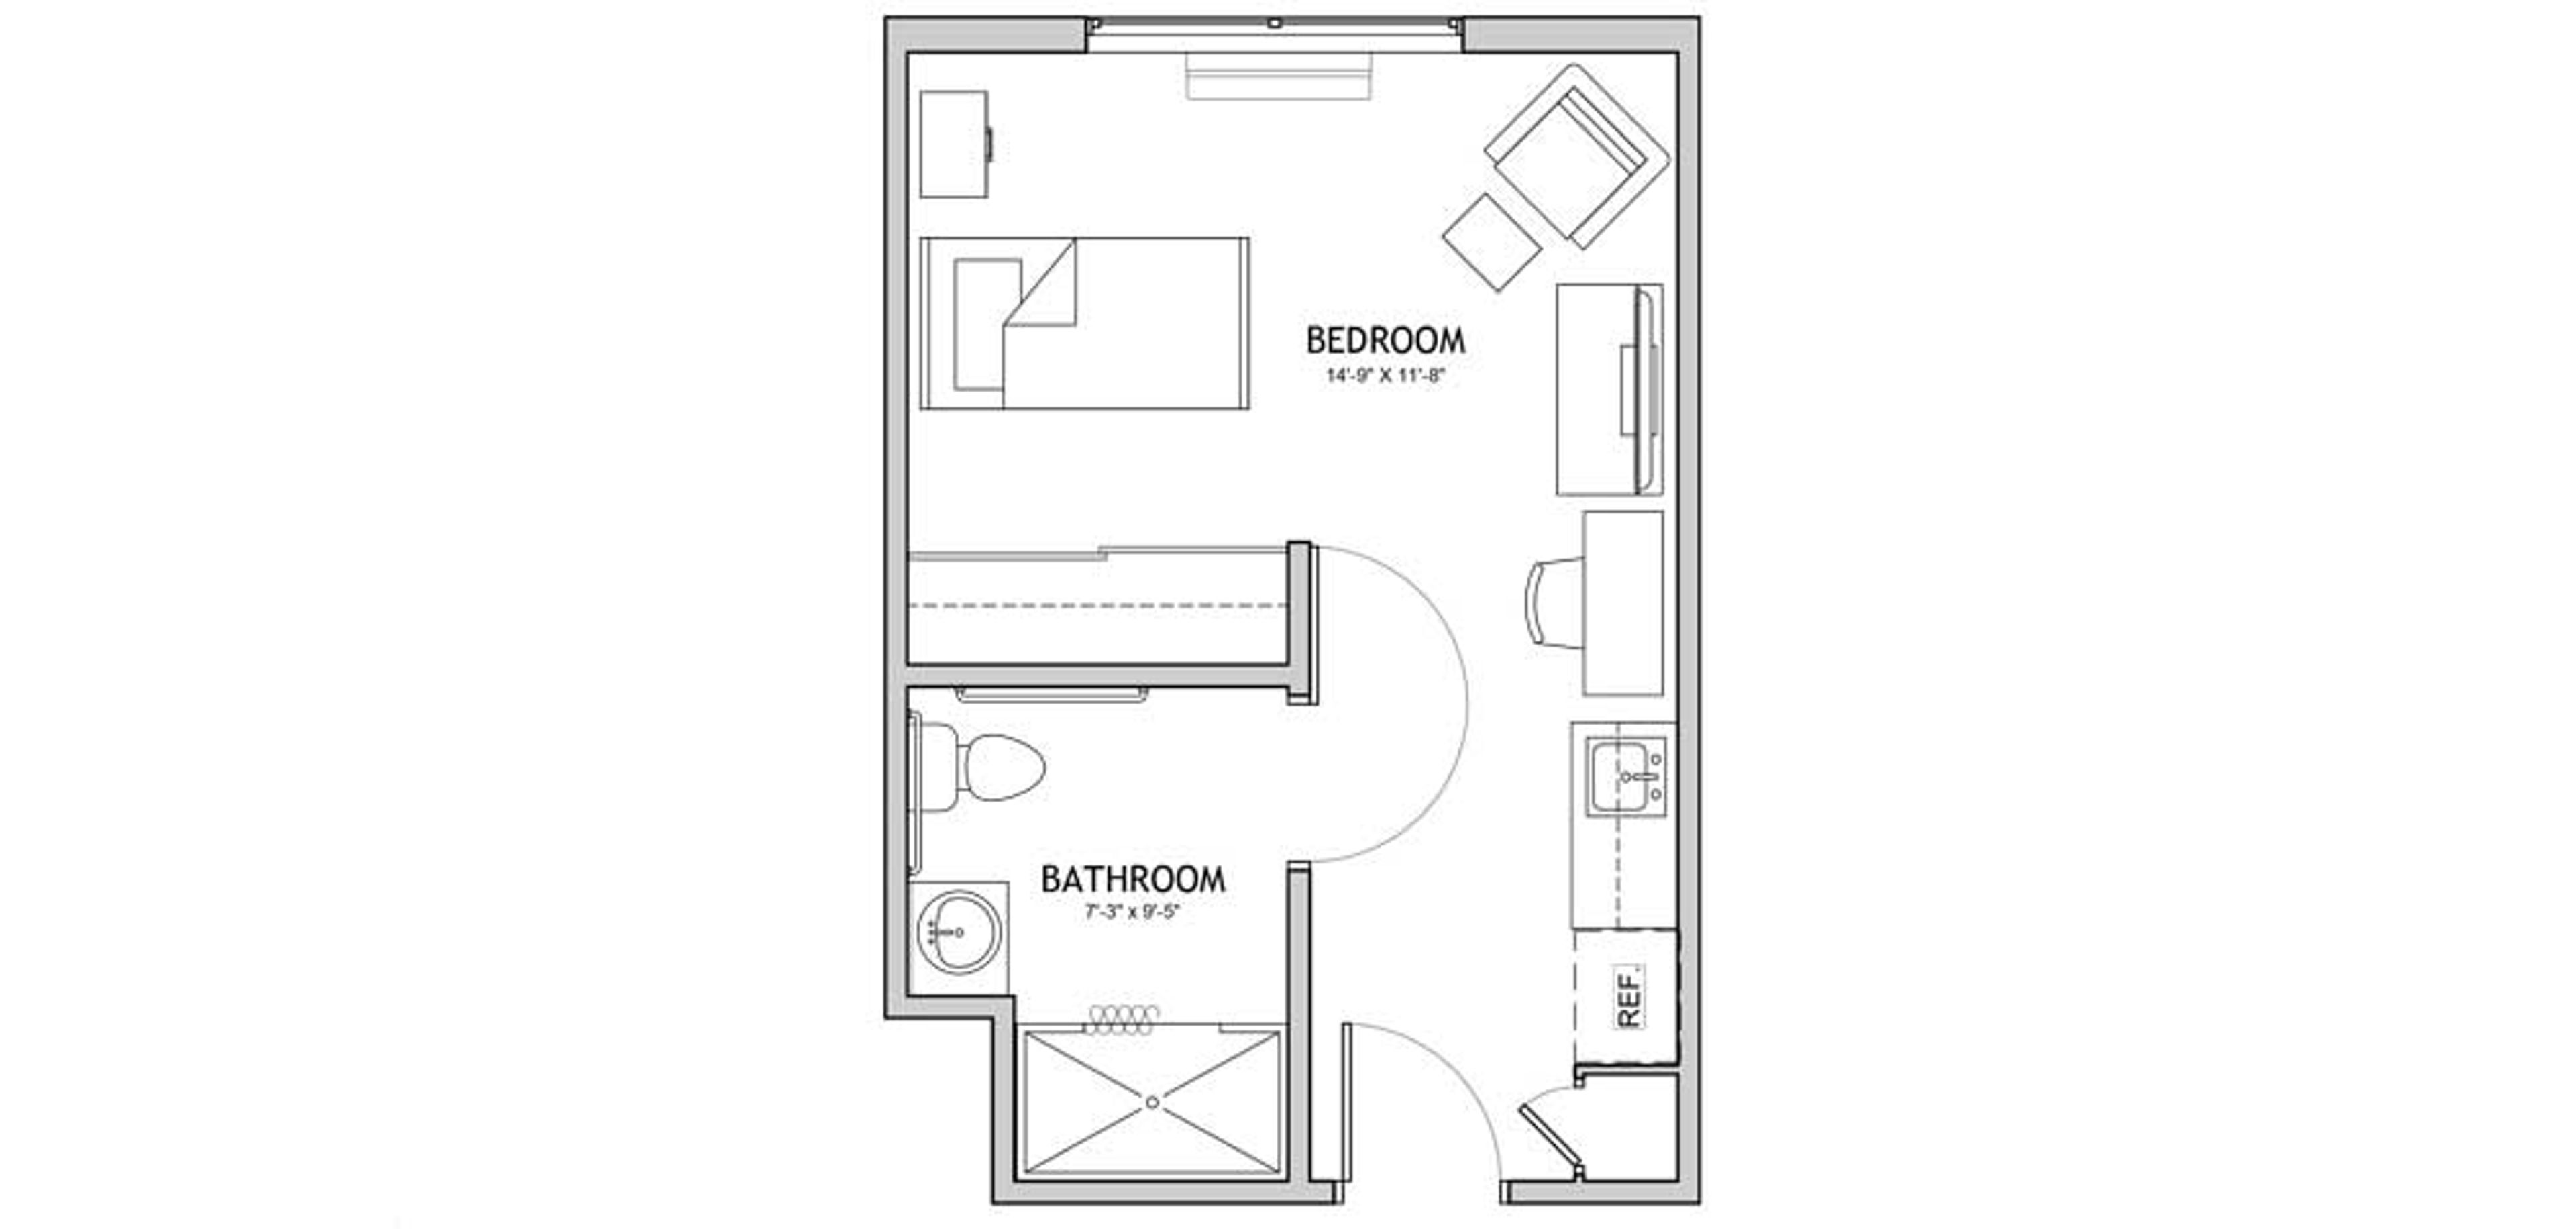 Floorplan - The Auberge at North Ogden - 1 bed, 1 bath, 333 sq. ft. Memory Care